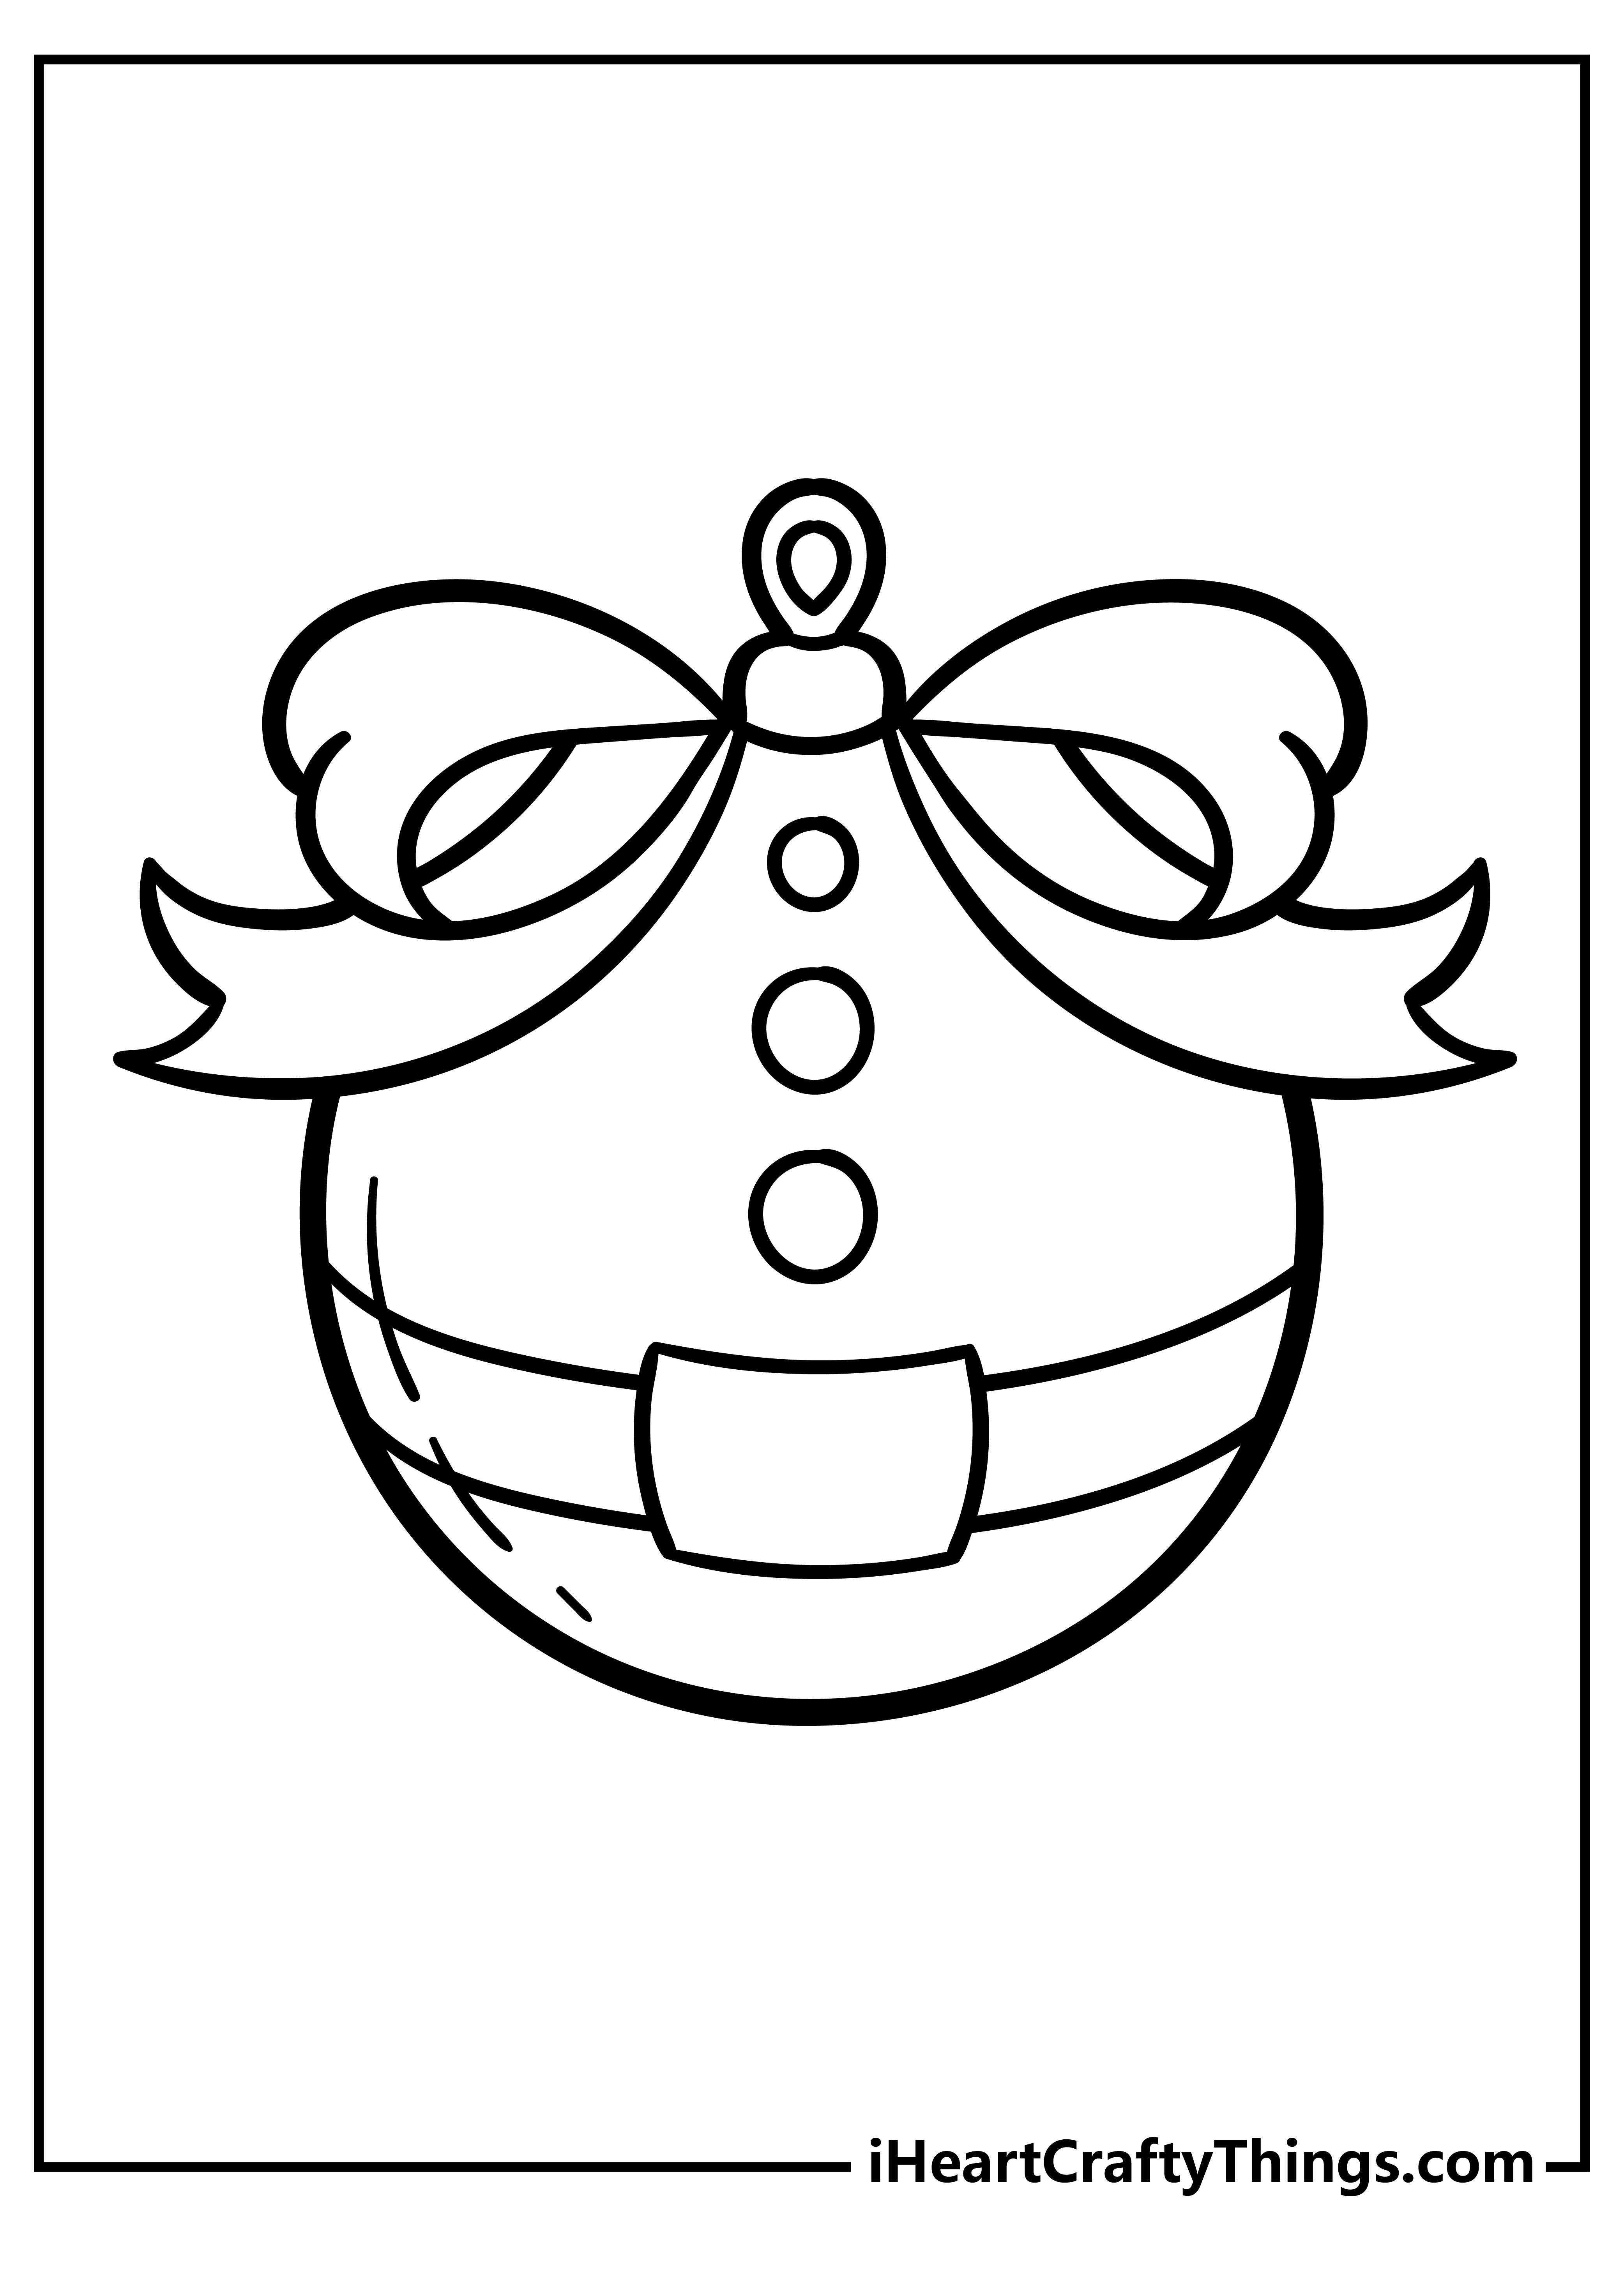 26 Christmas Ornament Coloring Pages